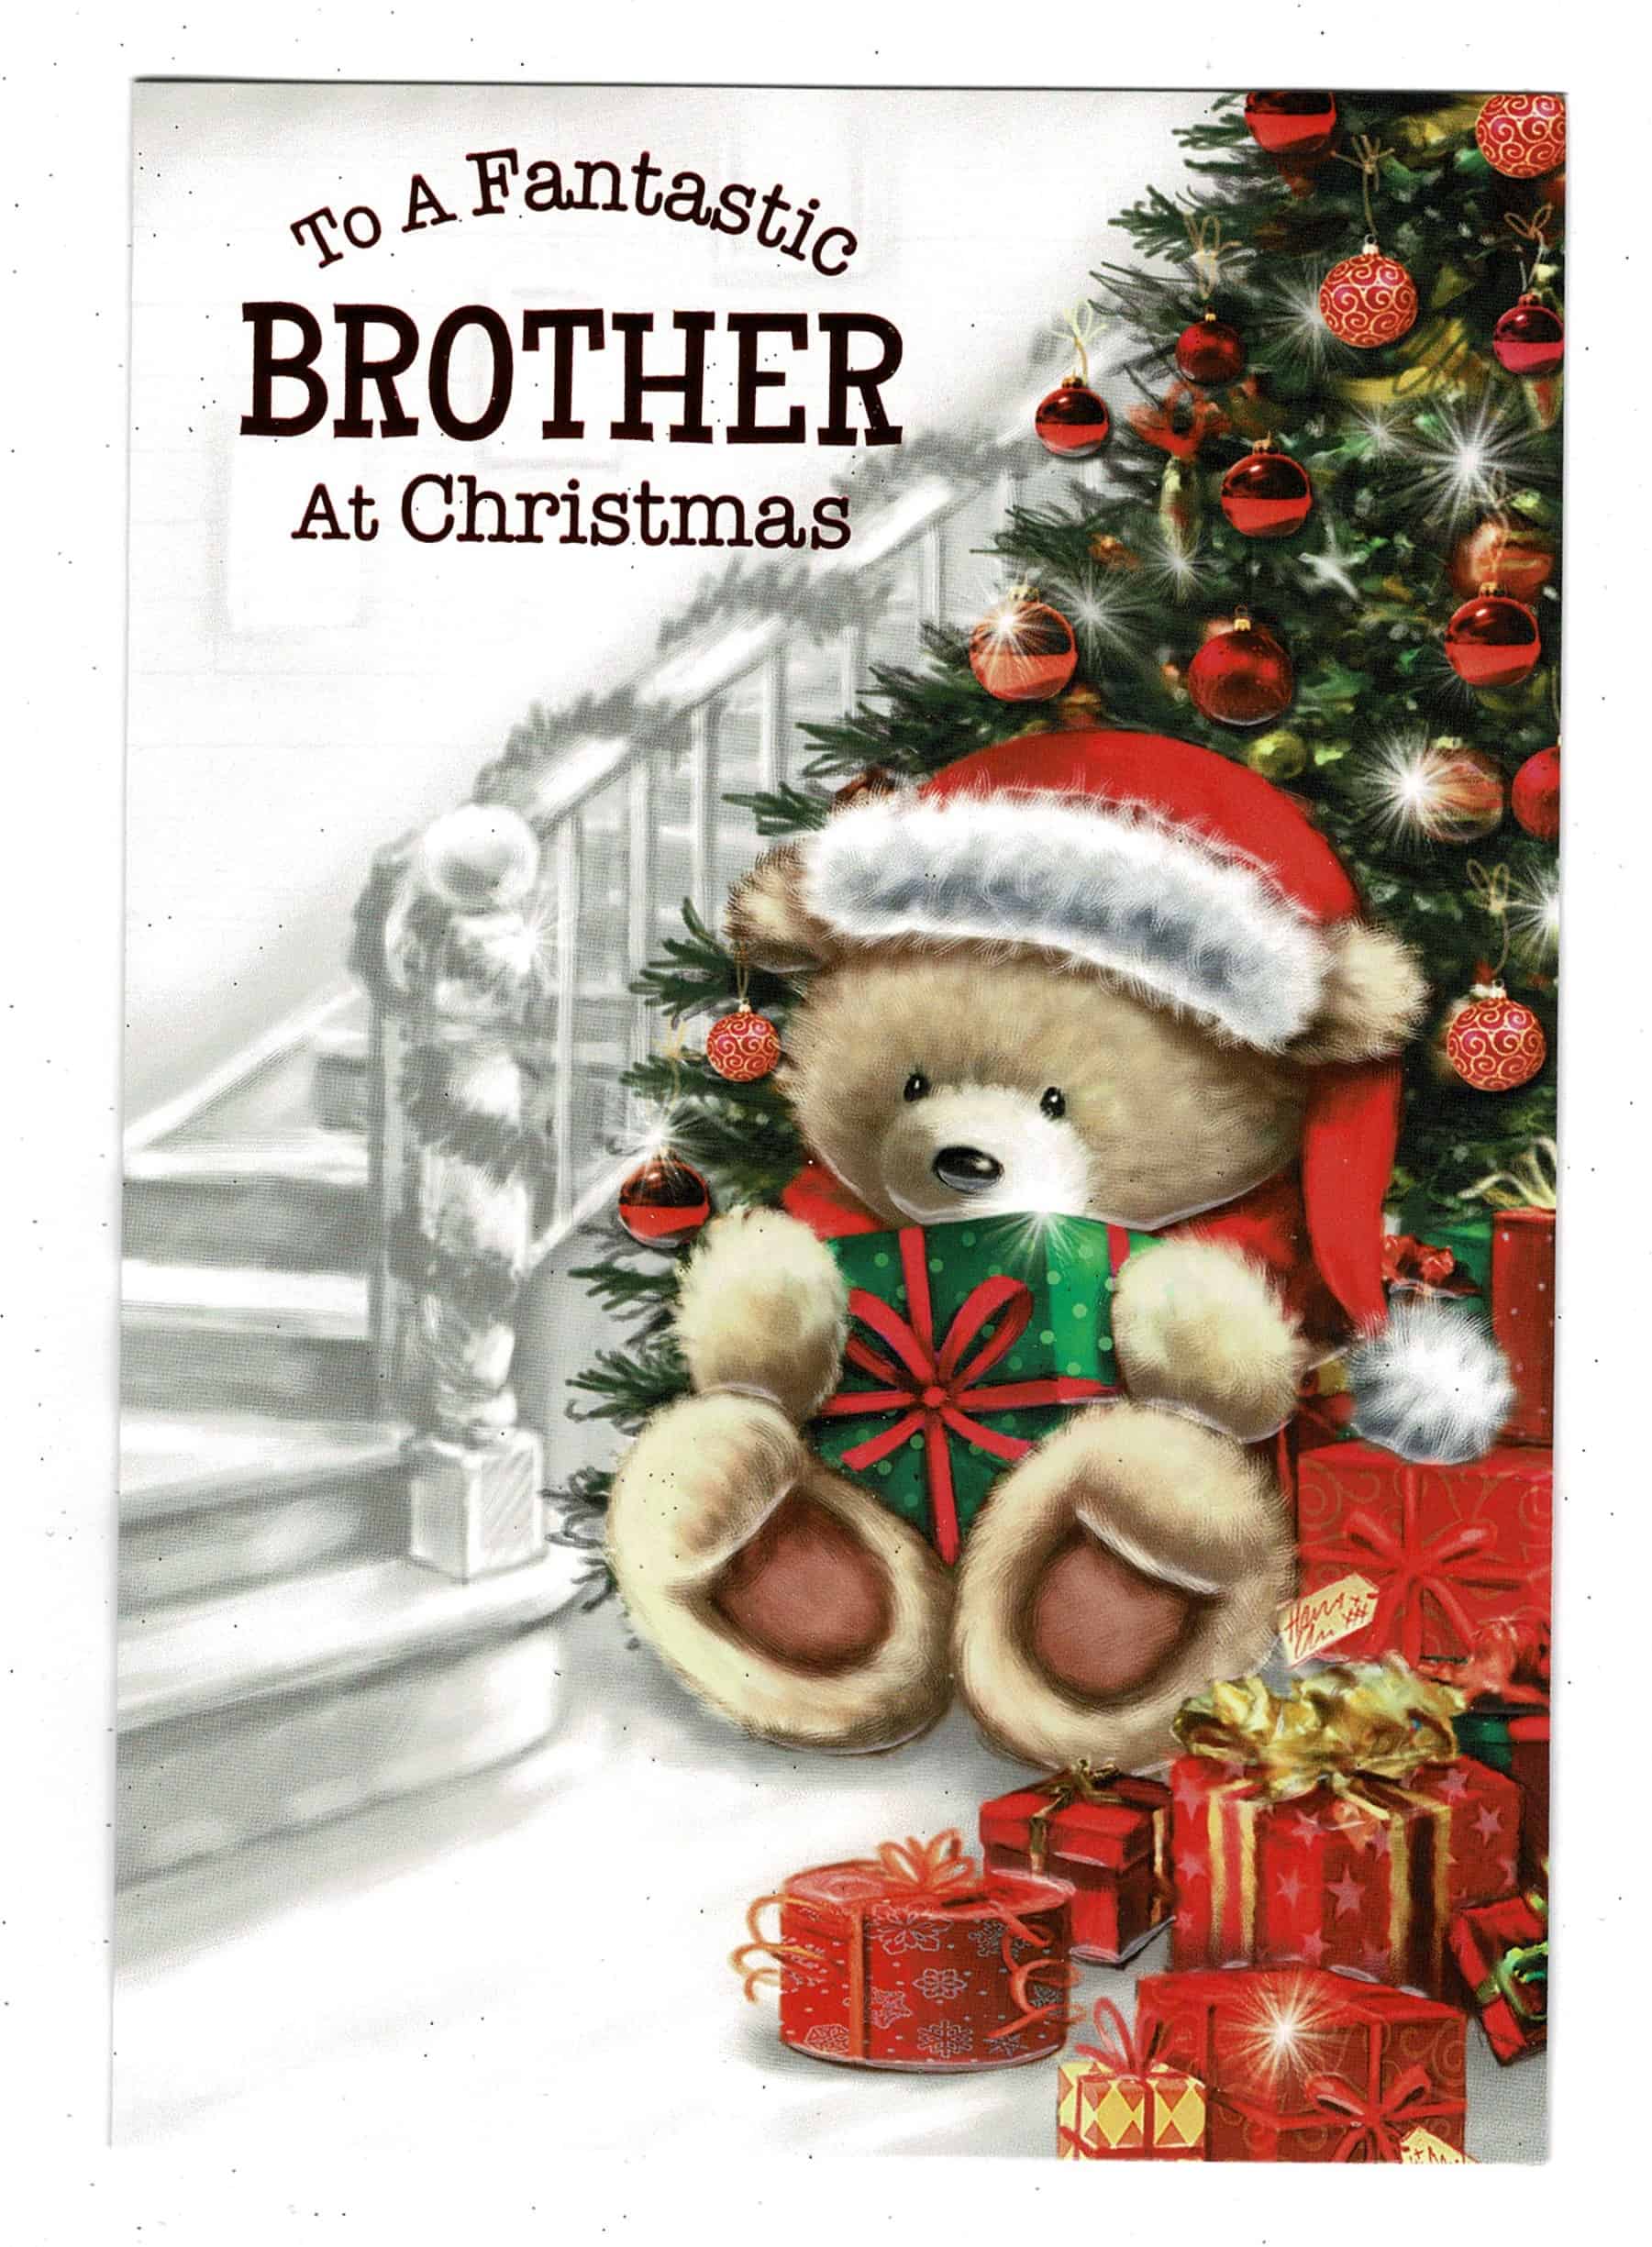 Brother Christmas Card To A Fantastic Brother At Christmas With